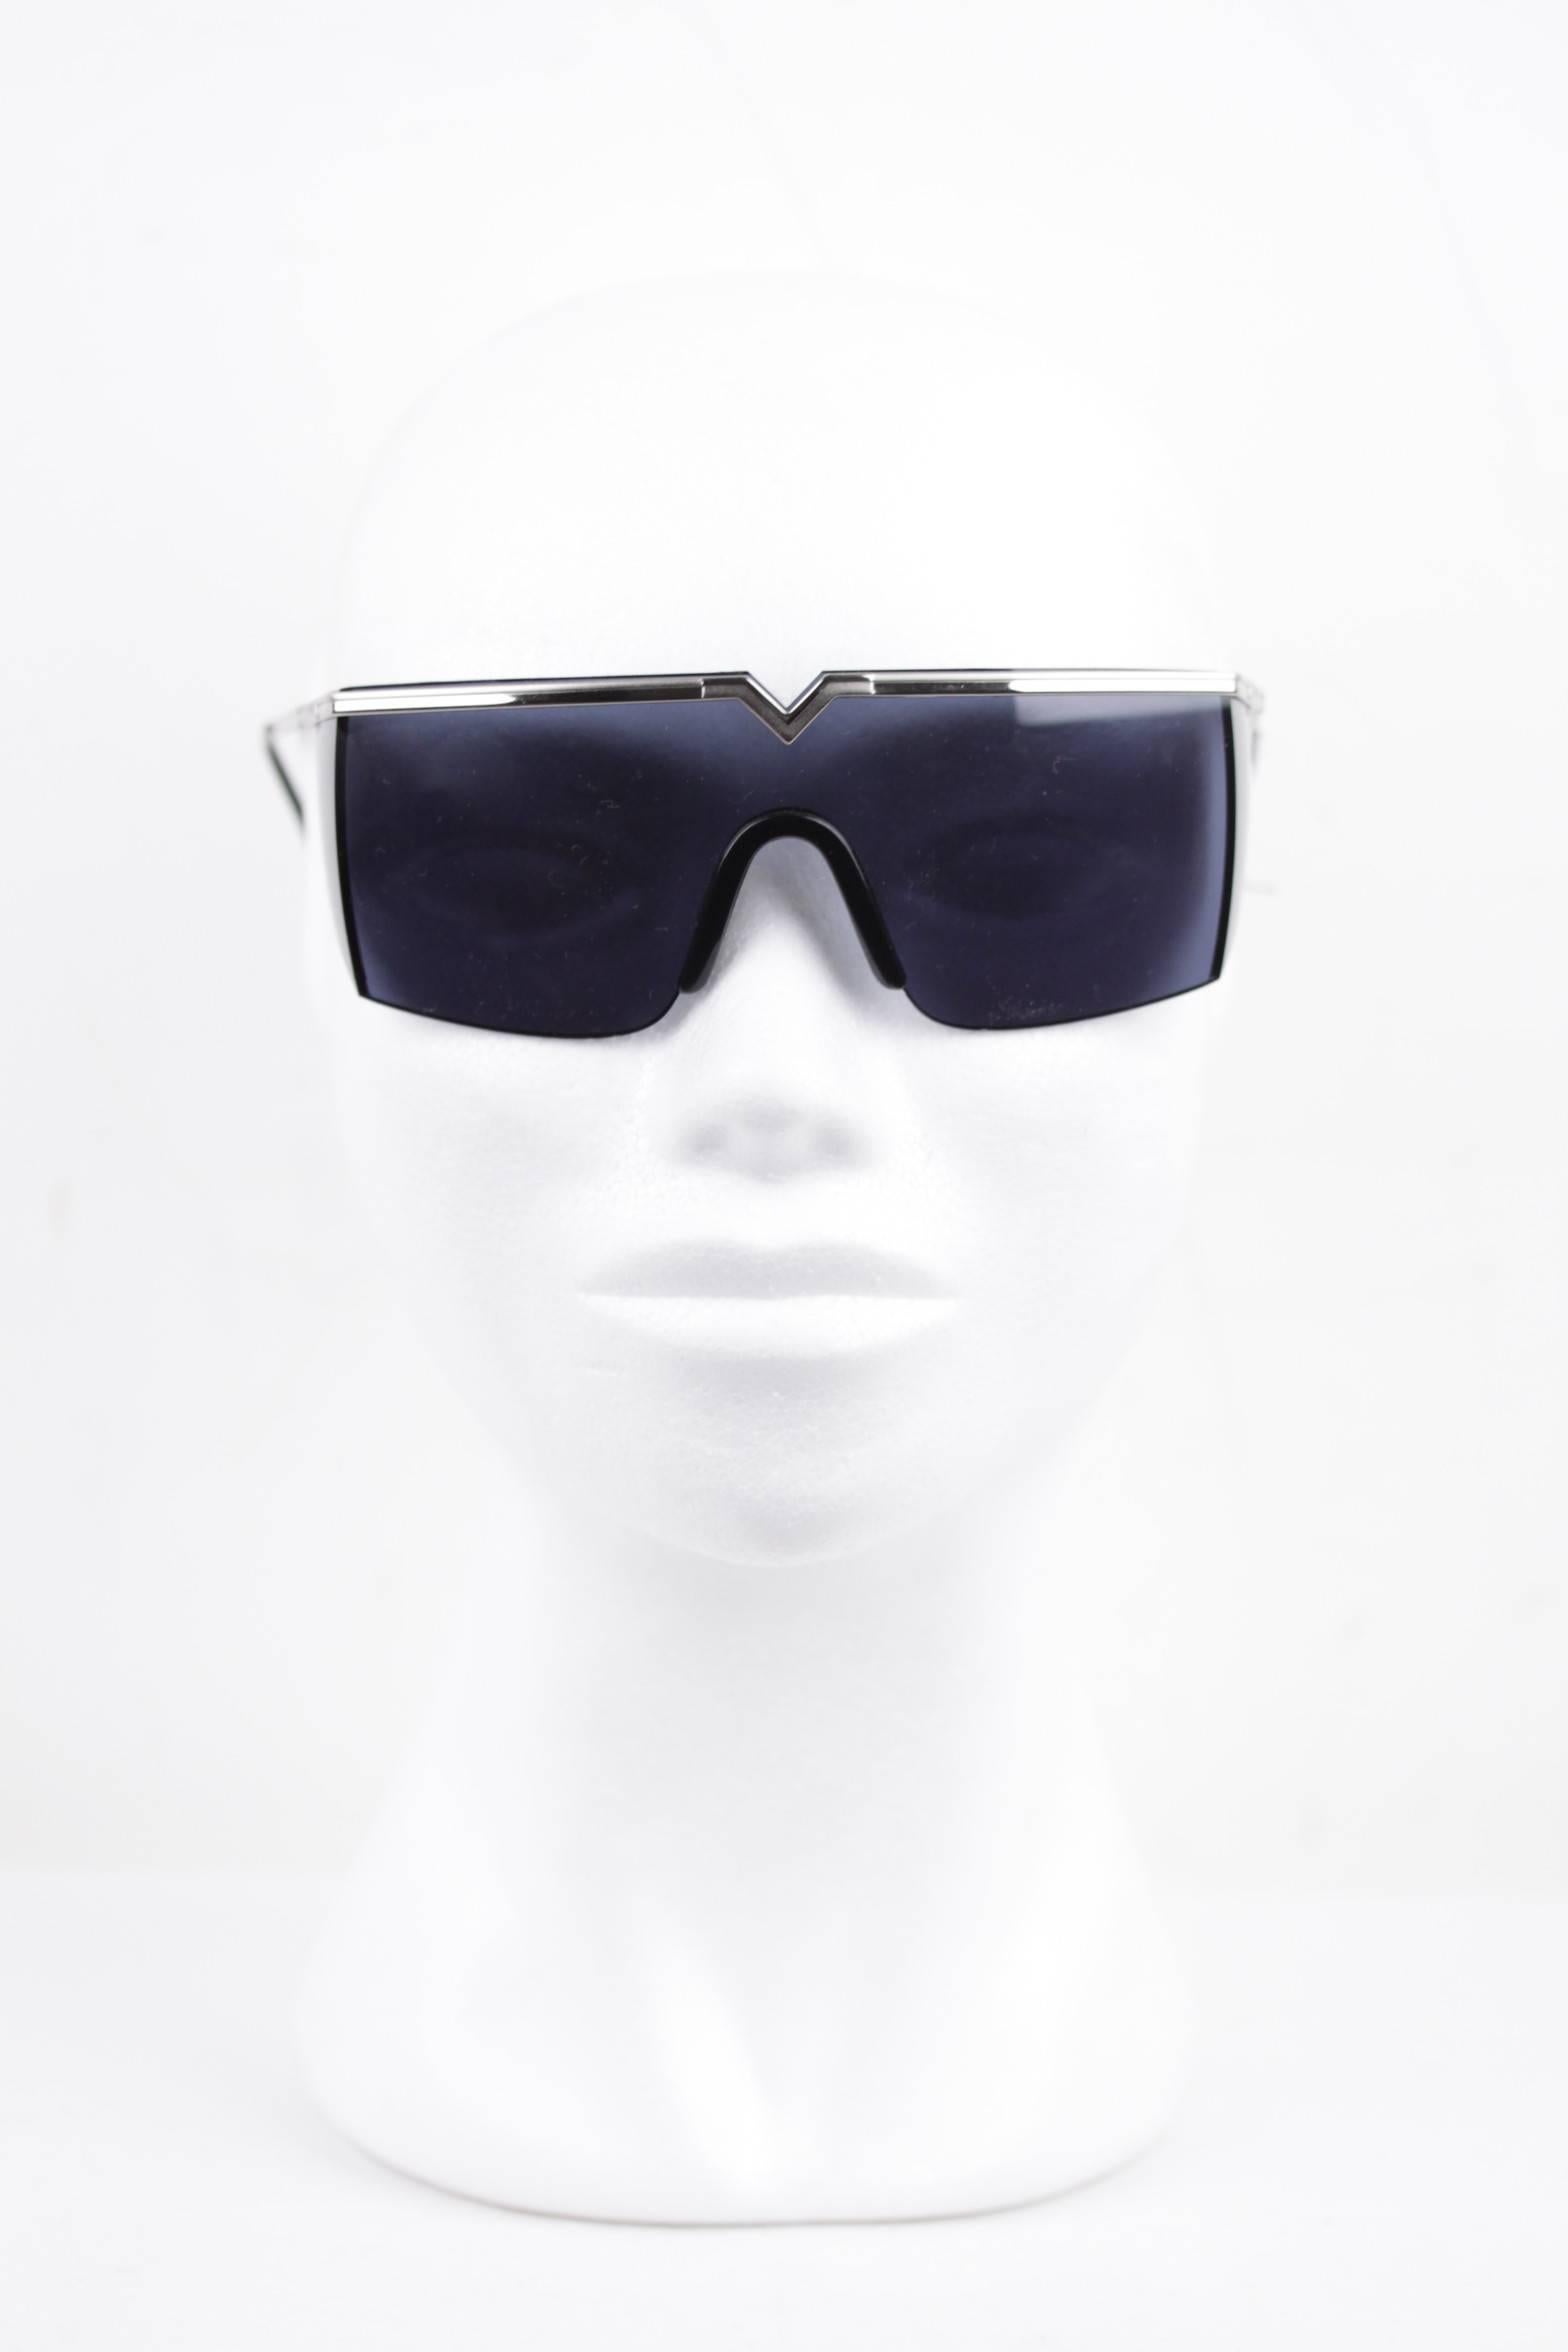 - Vintage Sunglasses of Versace from the early 90s

- Gold metal Shield sunglasses

- Extravagant Futuristic design

- VERSACE signature on temples

- Exclusive design made in Italy

- One-piece blue lens with side shields

- RARE